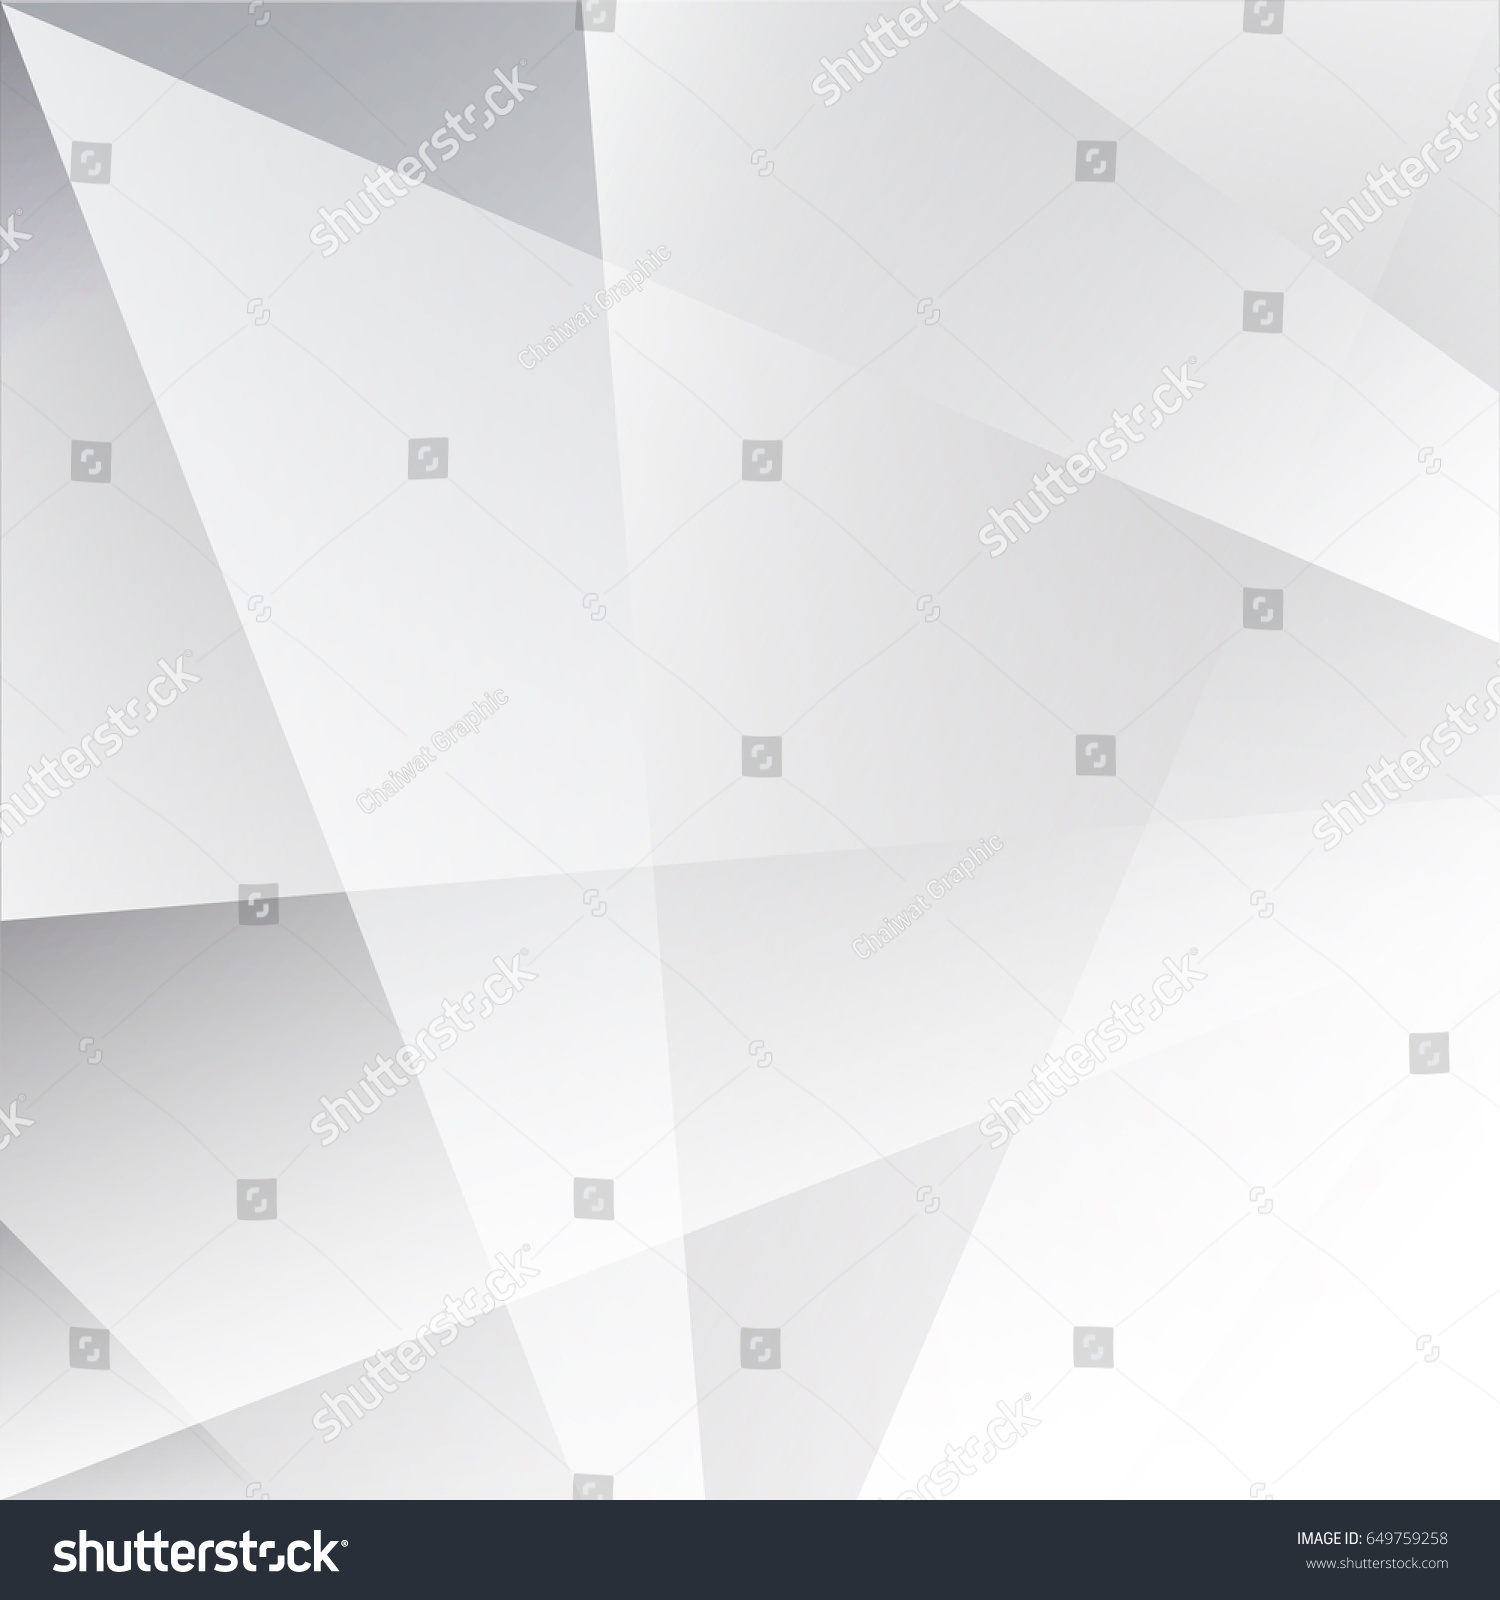 Abstract  geometric White and gray color technology modern futuristic background, vector illustration #649759258